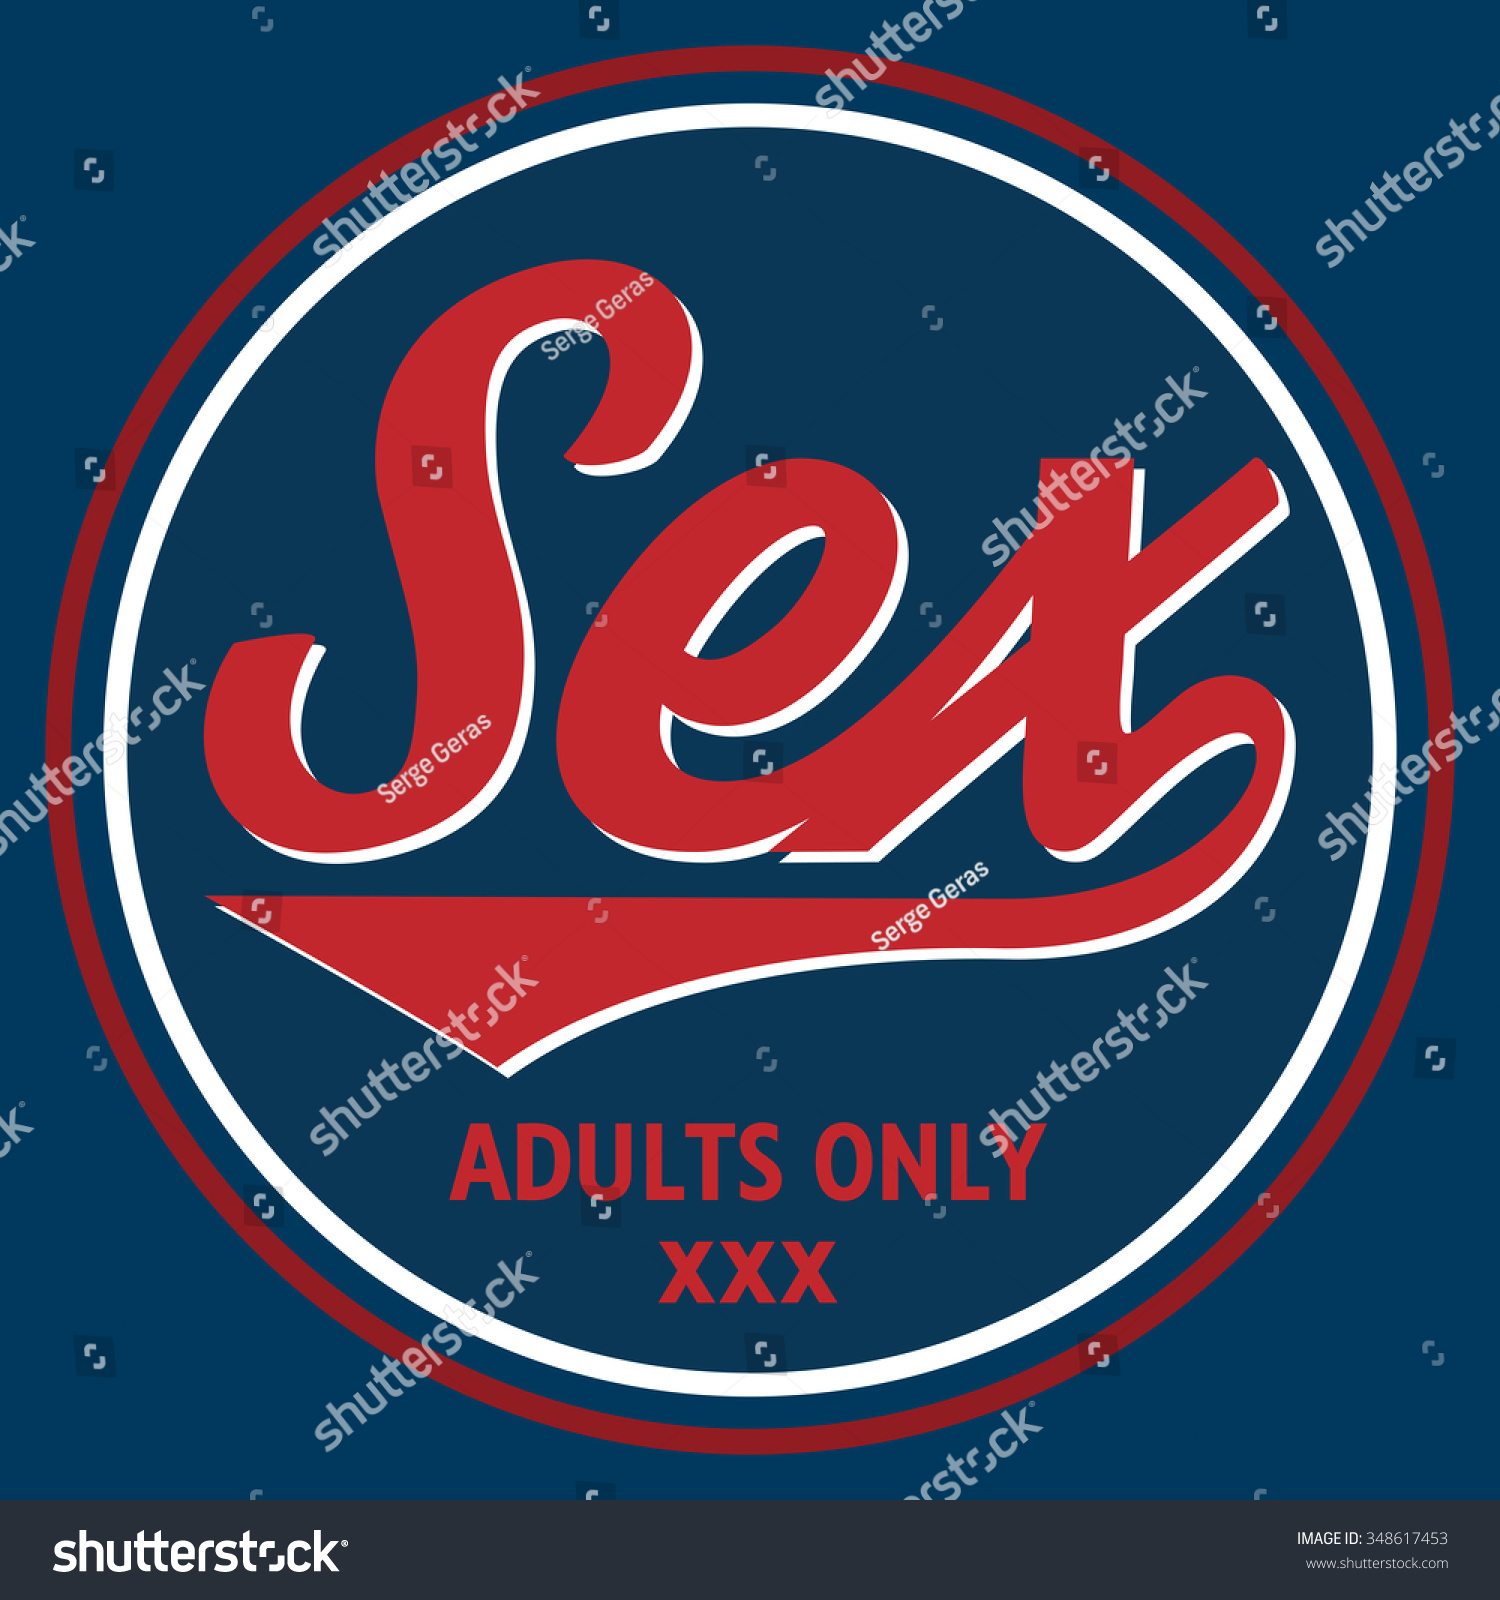 Vector Illustration On The Theme Of Sex Slogan Sex Adults Only Retro Design Vintage Style 